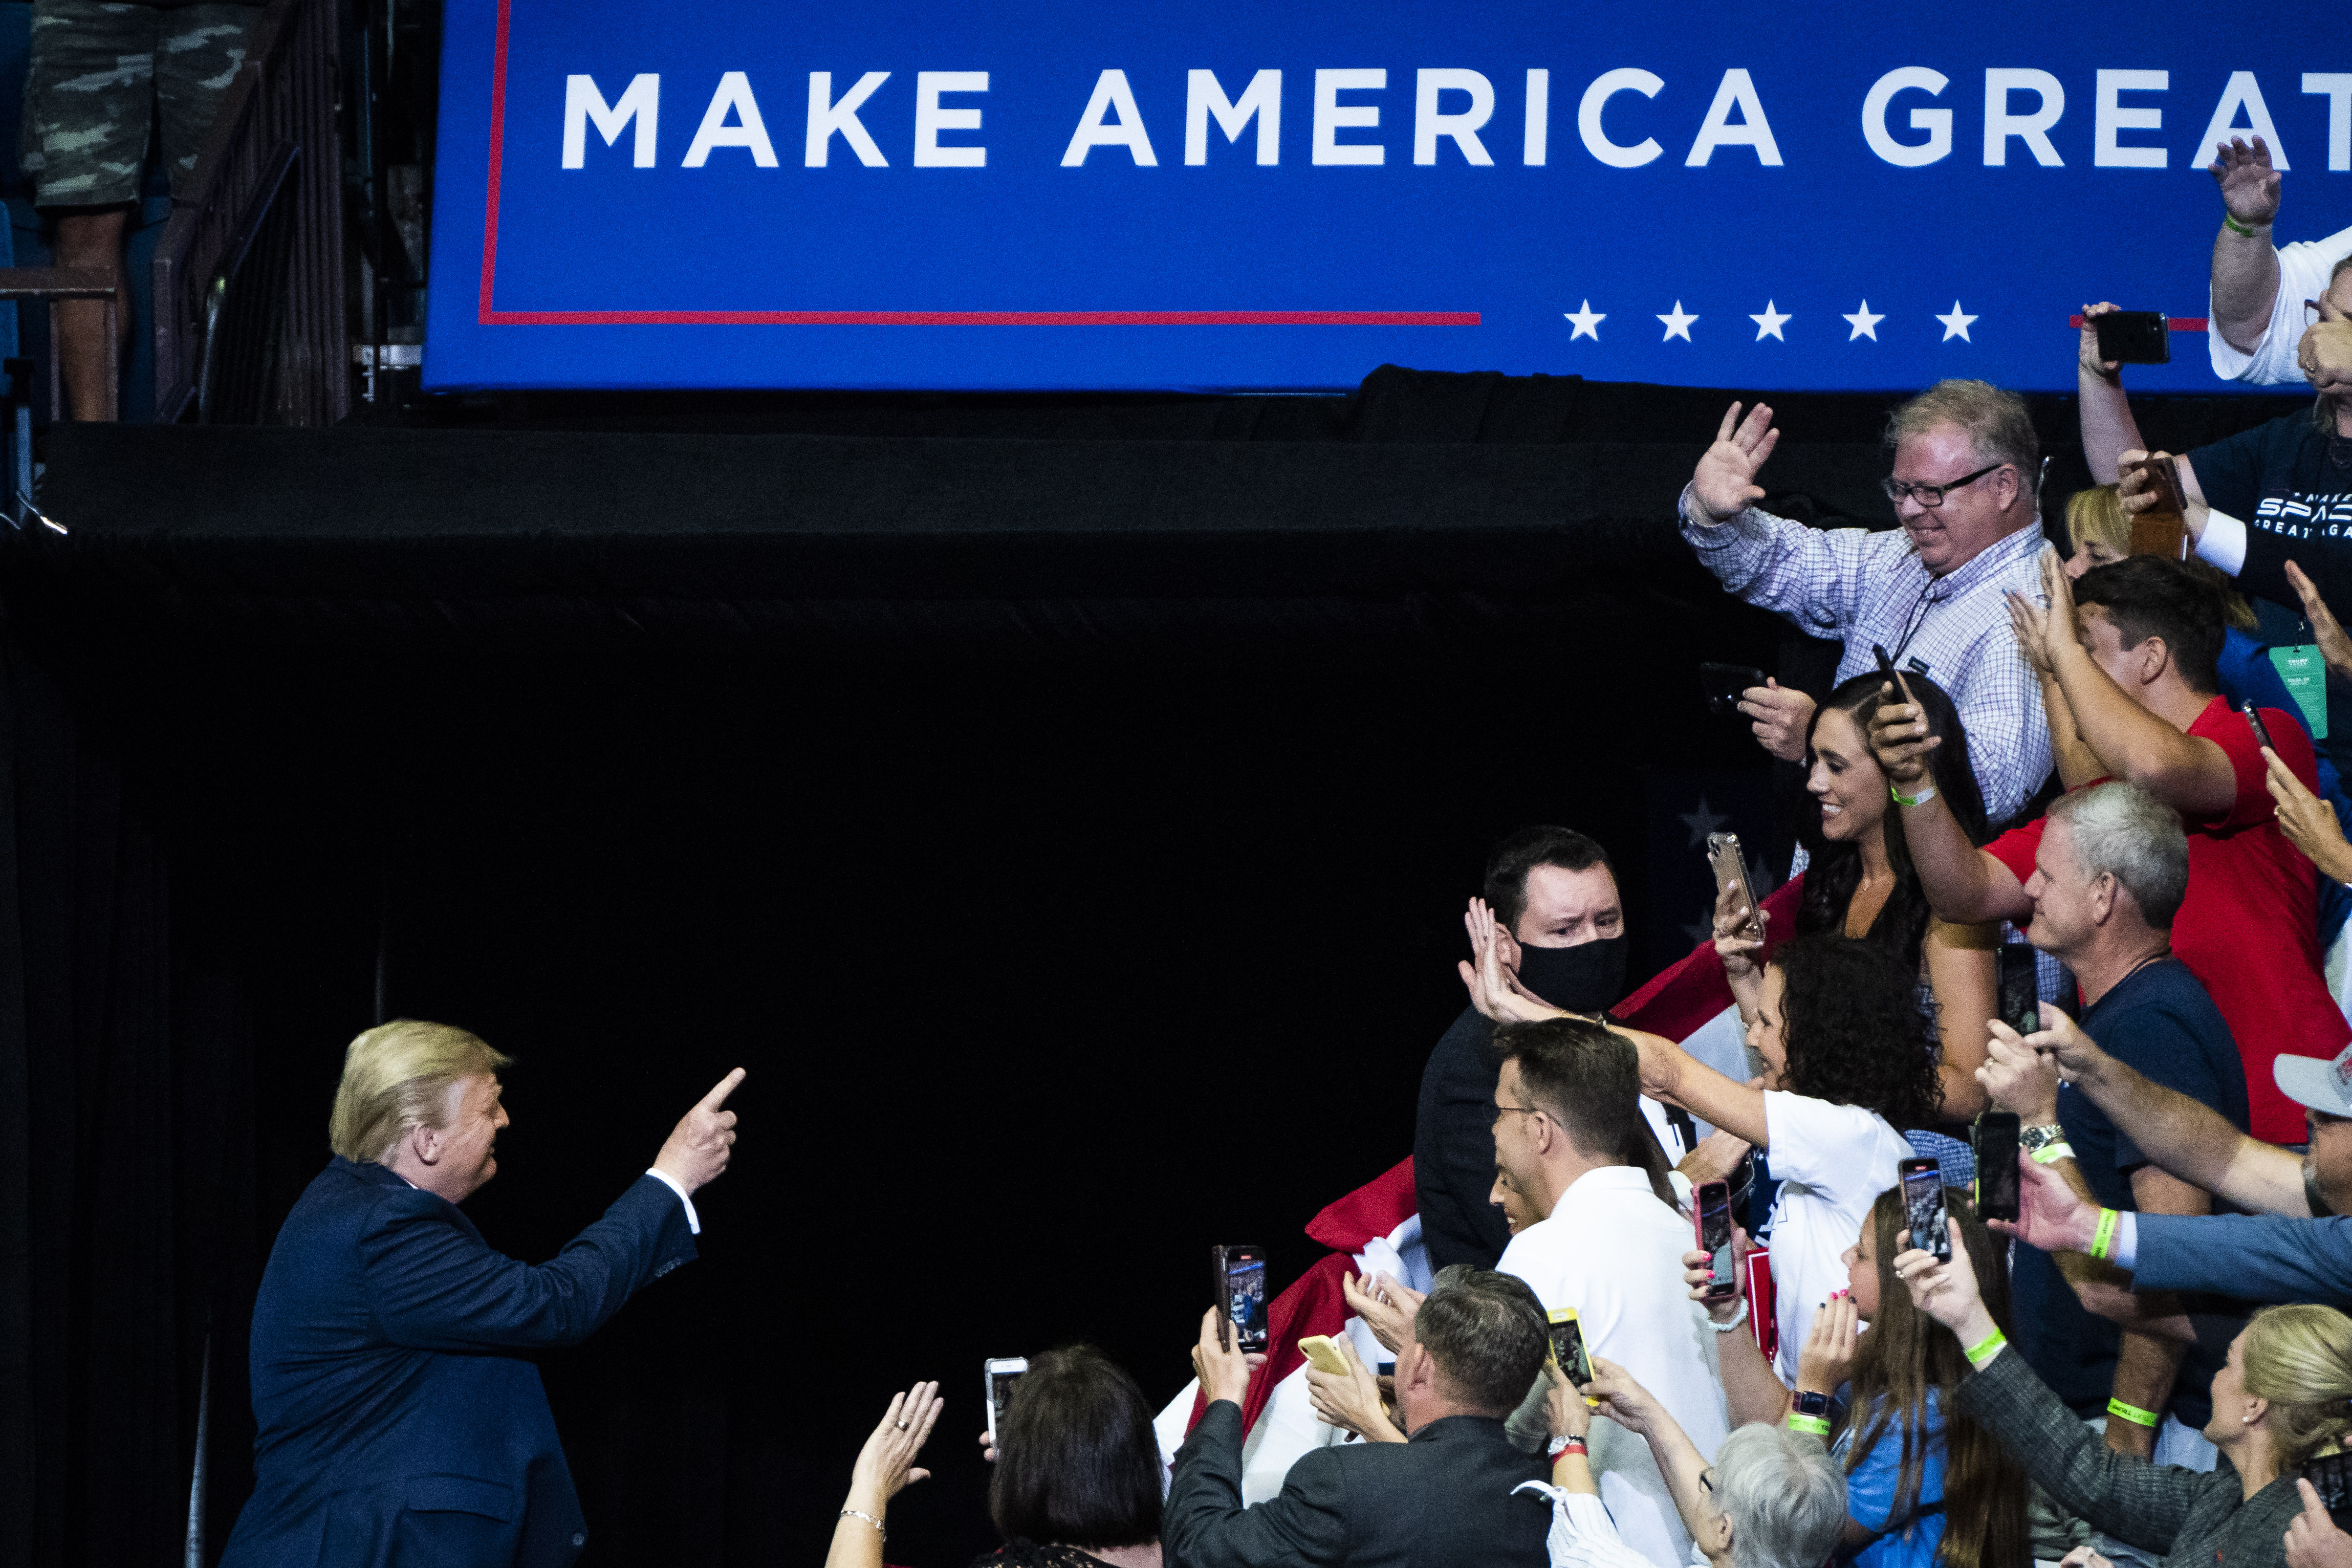 TULSA, OK - JUNE 20: President Donald J. Trump arrives for a "Make America Great Again!" rally at the BOK Center on Saturday, June 20, 2020 in Tulsa, OK. (Photo by Jabin Botsford/The Washington Post via Getty Images)